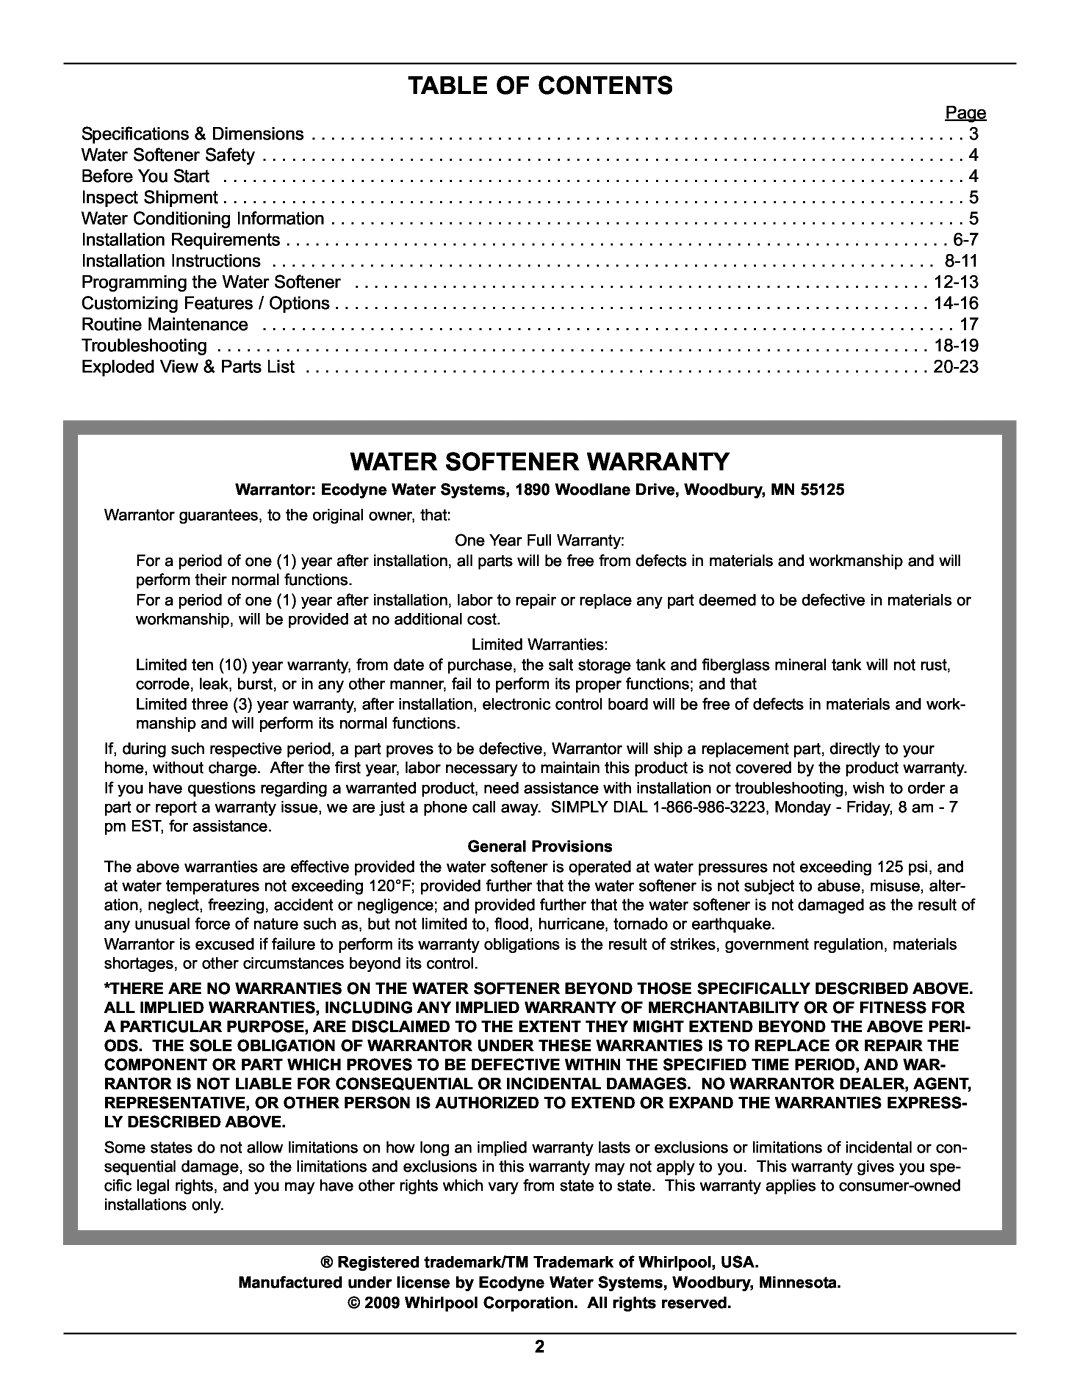 Whirlpool WHES40 operation manual Table Of Contents, Water Softener Warranty 